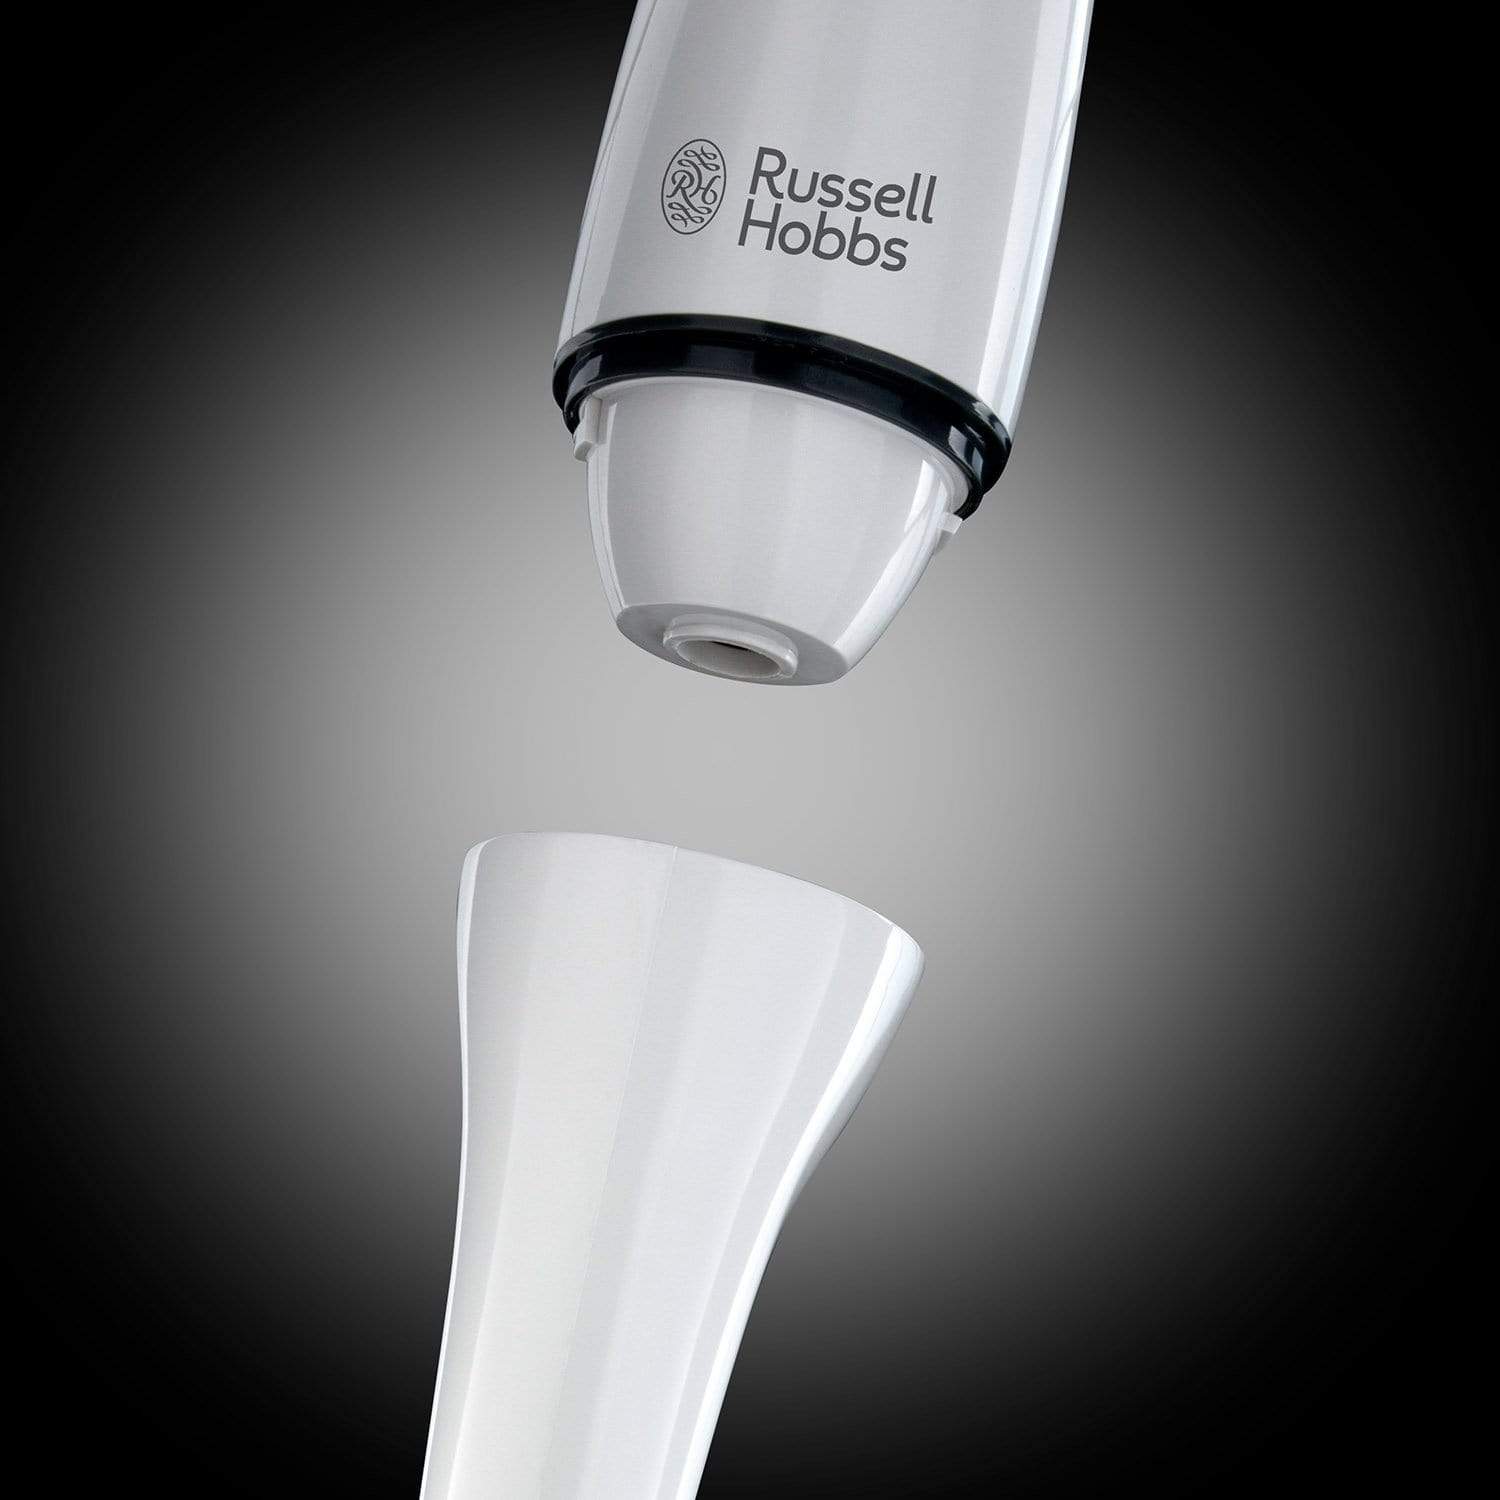 Russell Hobbs Food Collection Hand Blender